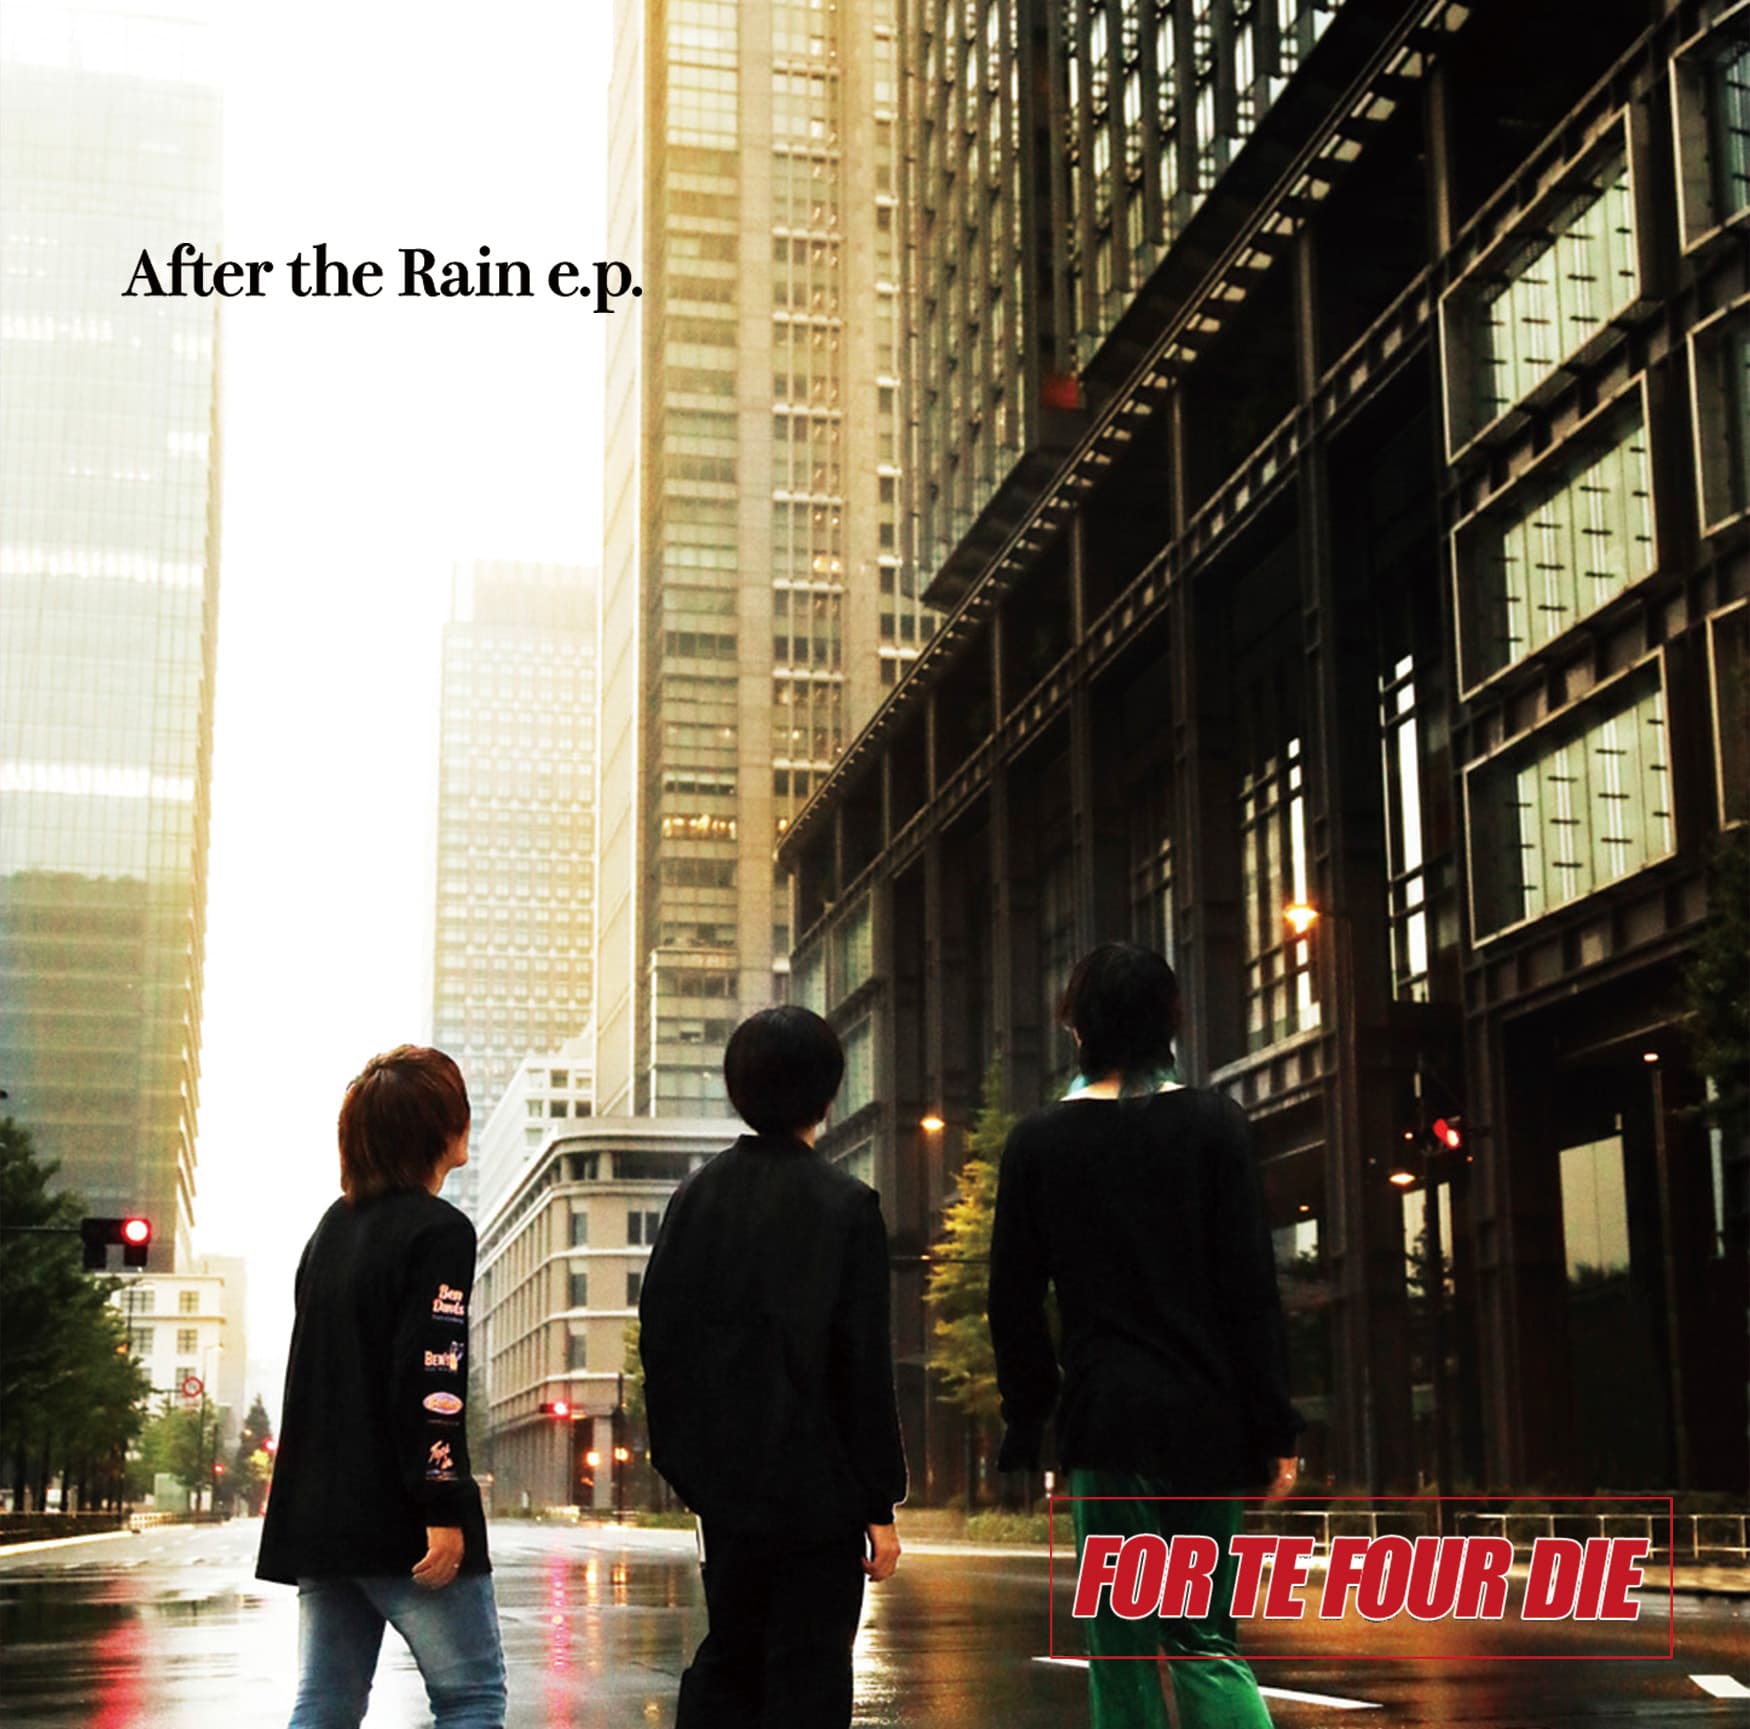 FOR TE FOUR DIE / After the rain e.p